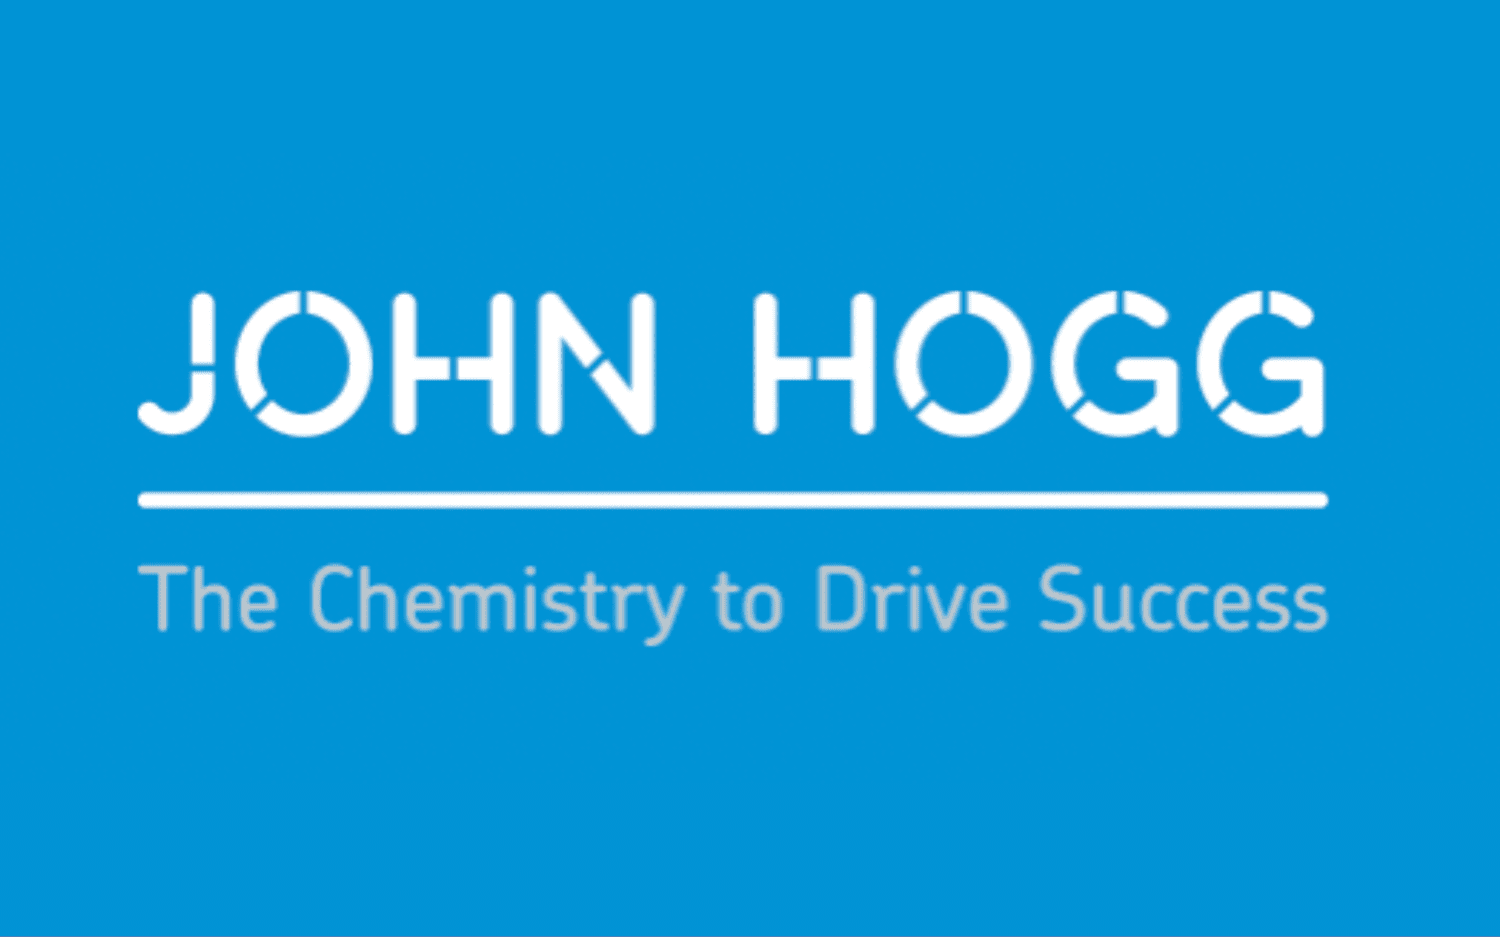 John Hogg Technical Solutions – to create a culture to dye for